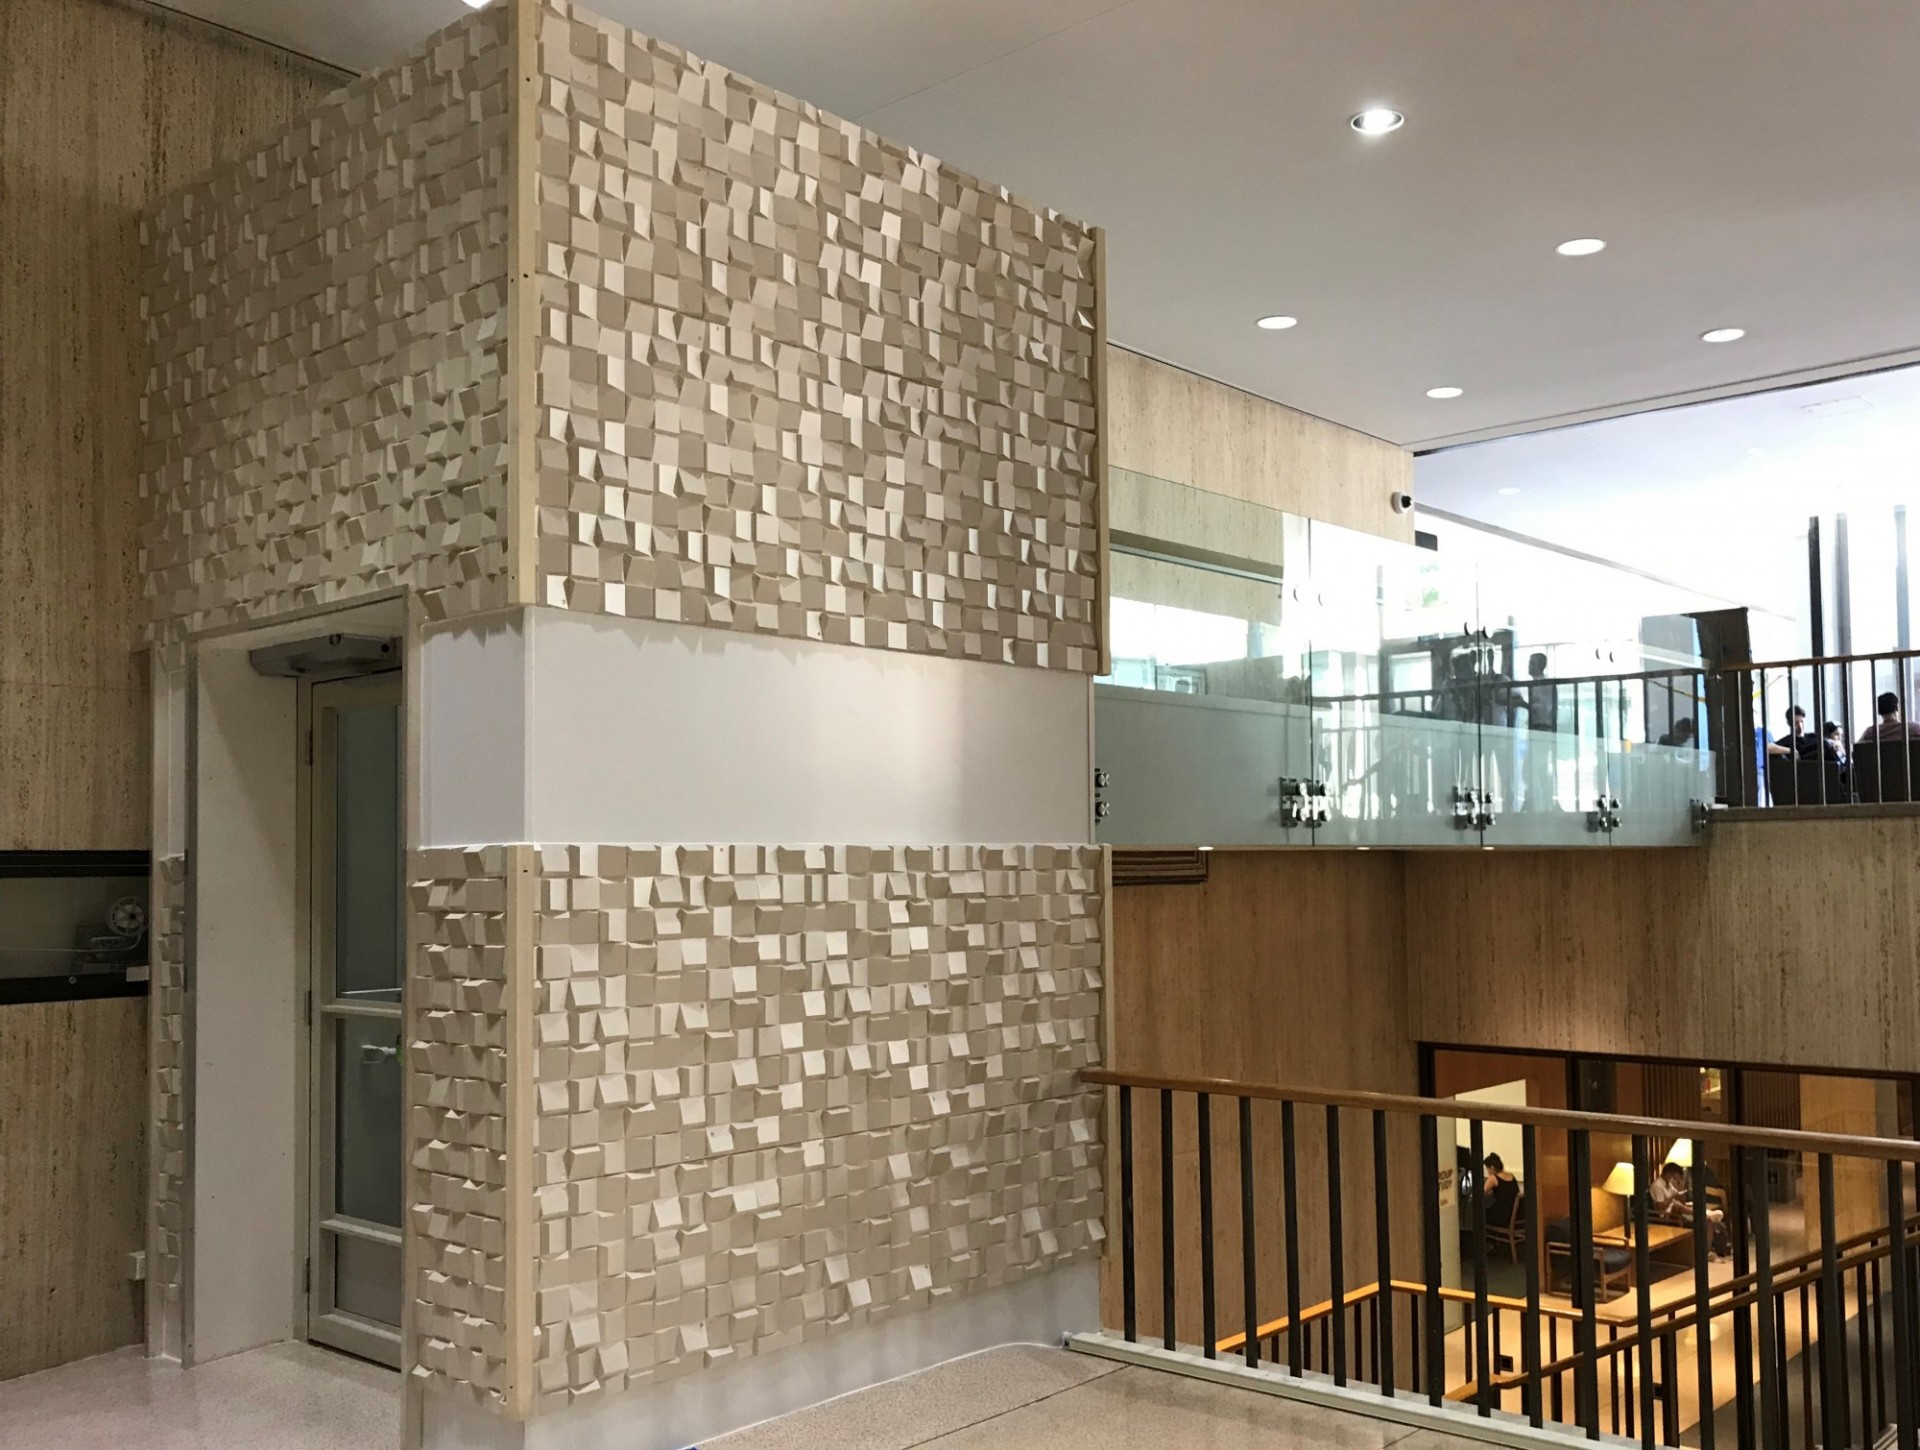 The accessible lift on the fourth floor of the International Affairs building, which has tan tiles to blend in with the adjacent wall.